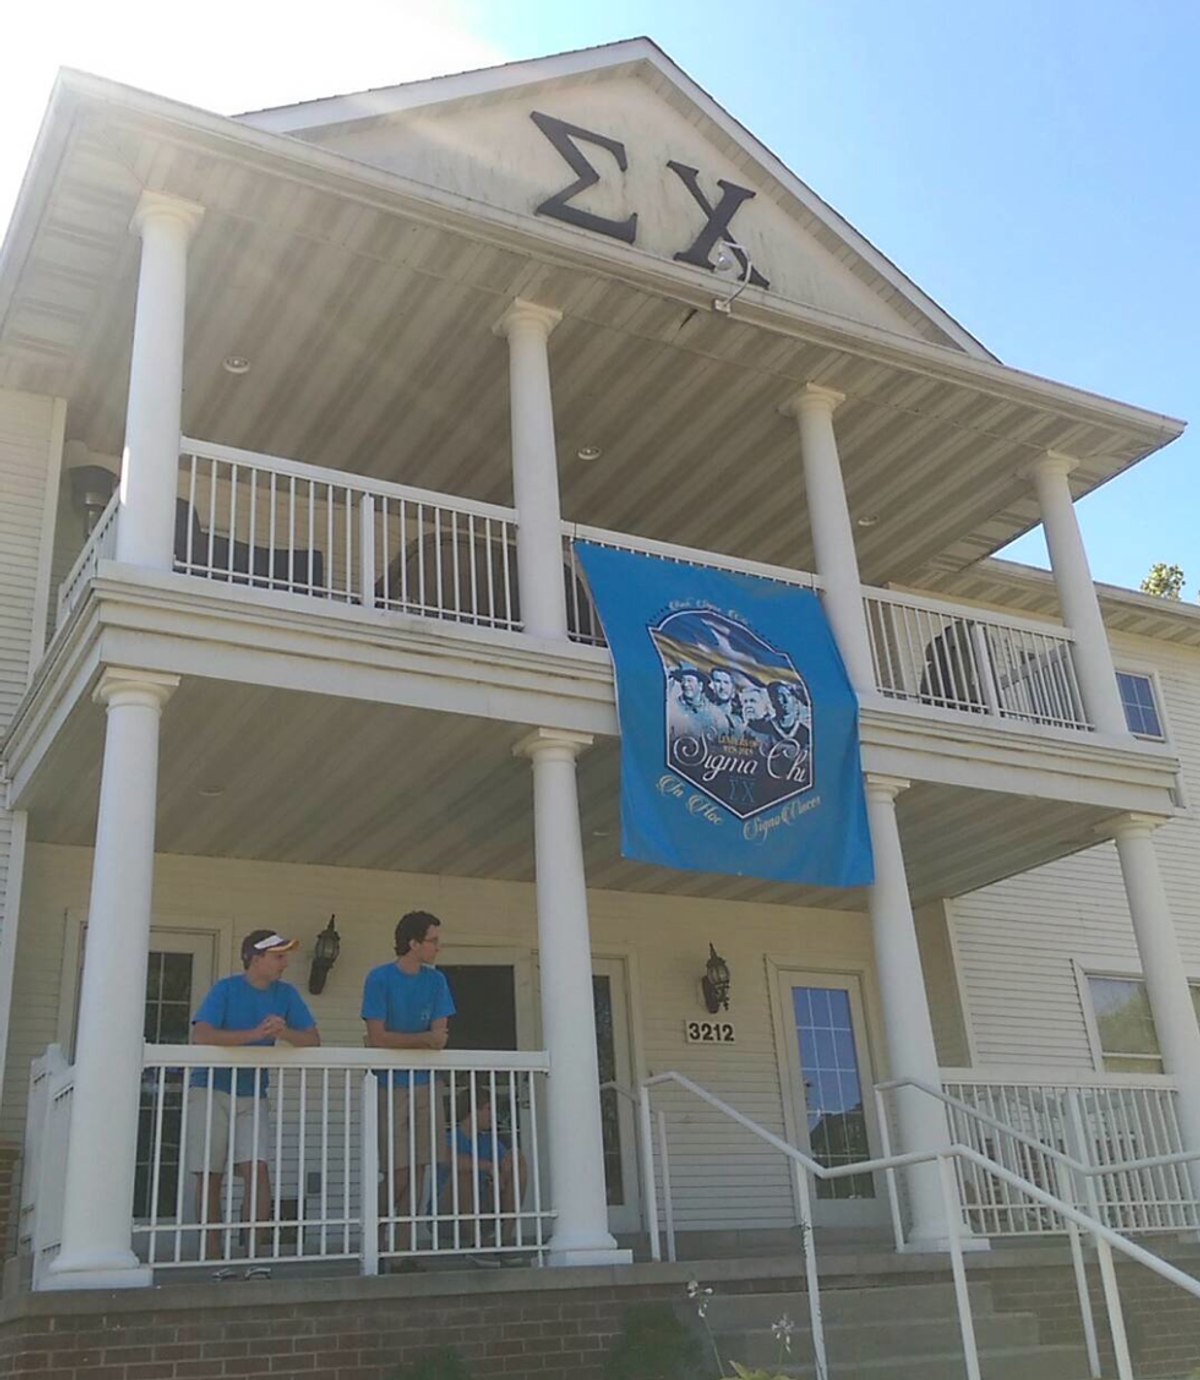 11 Things You Should Know Before Dating A Frat Guy